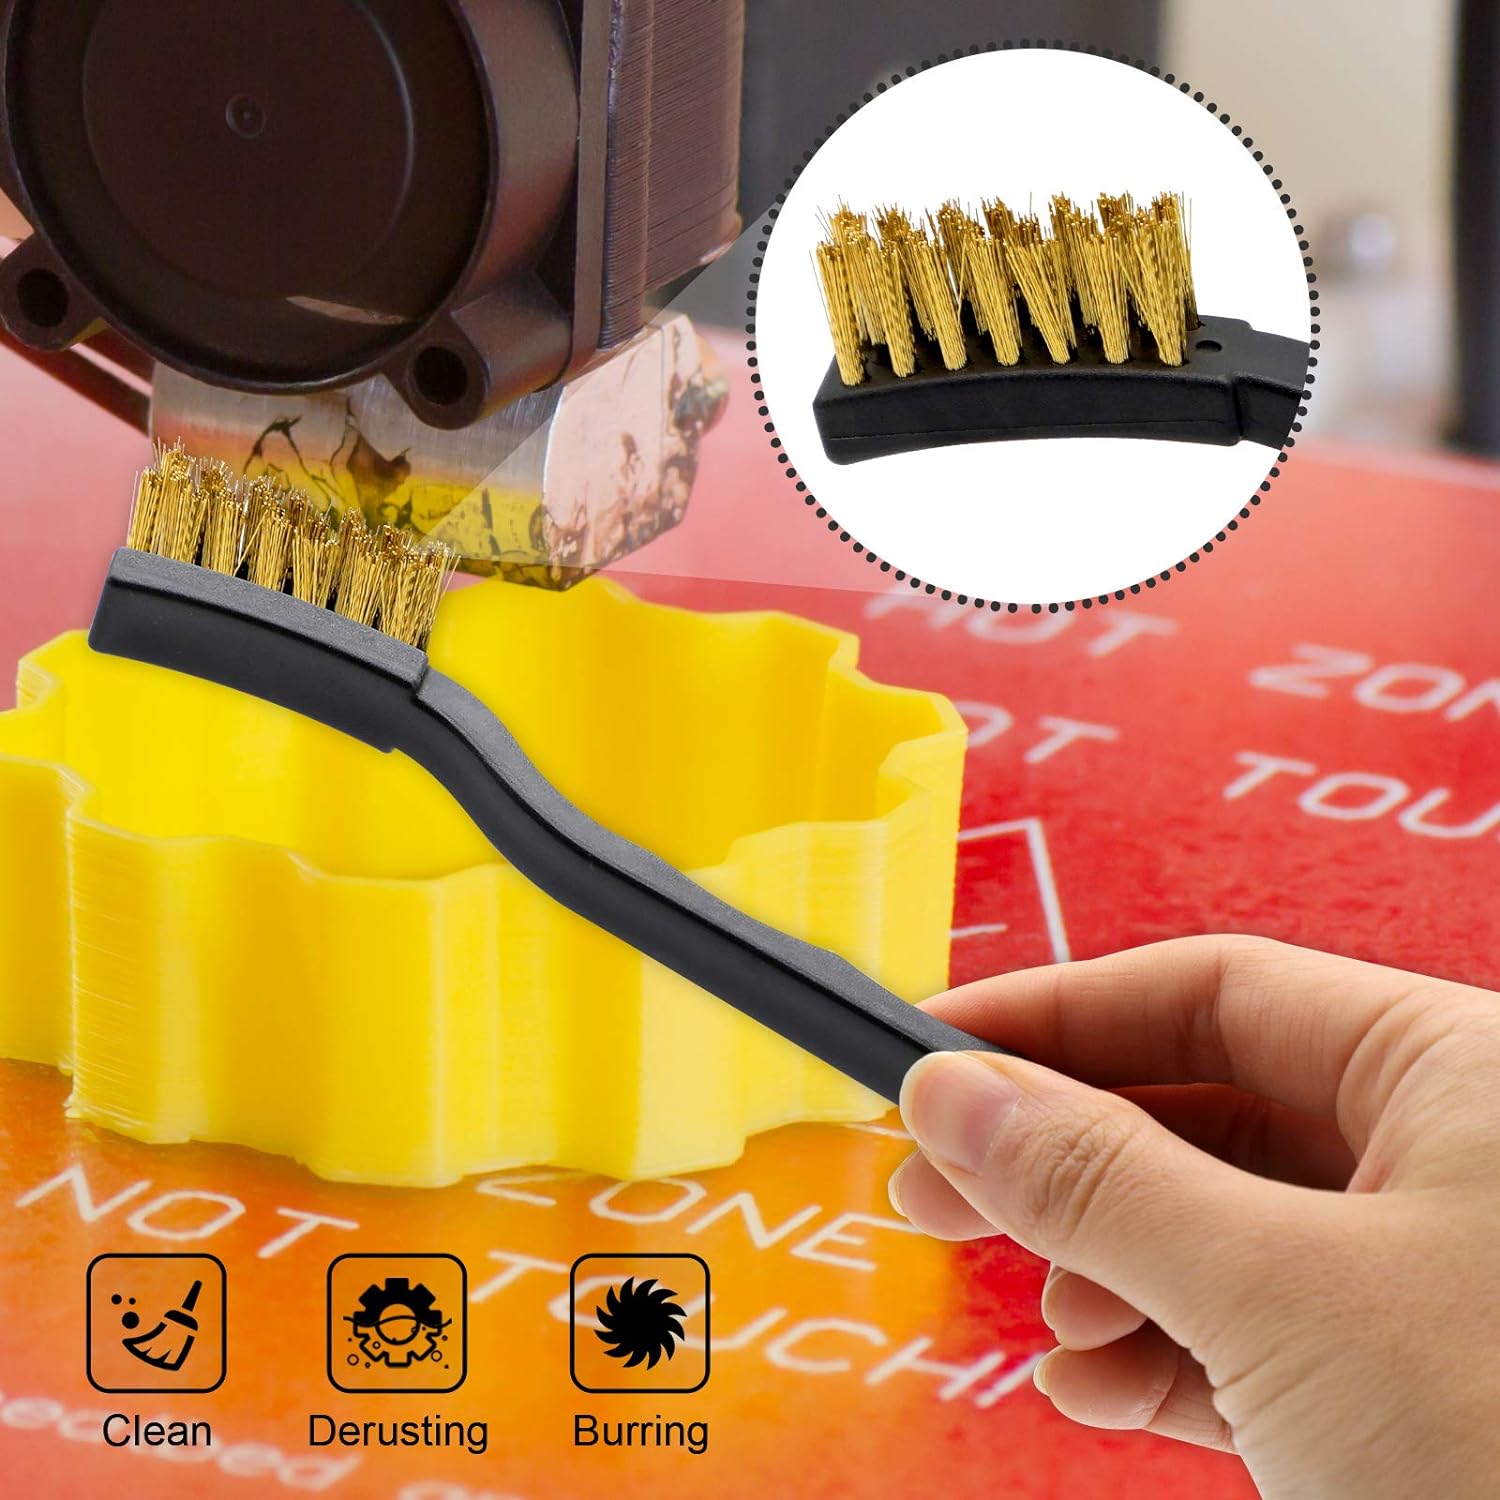 3d-printer-nozzle-cleaning-kit-with-brush-10-pieces-04-mm-cleaning-needles-2-types-sophisticated-tweezers-and-2-pieces-c-1 0.4 mm Cleaning Needles Kit Review